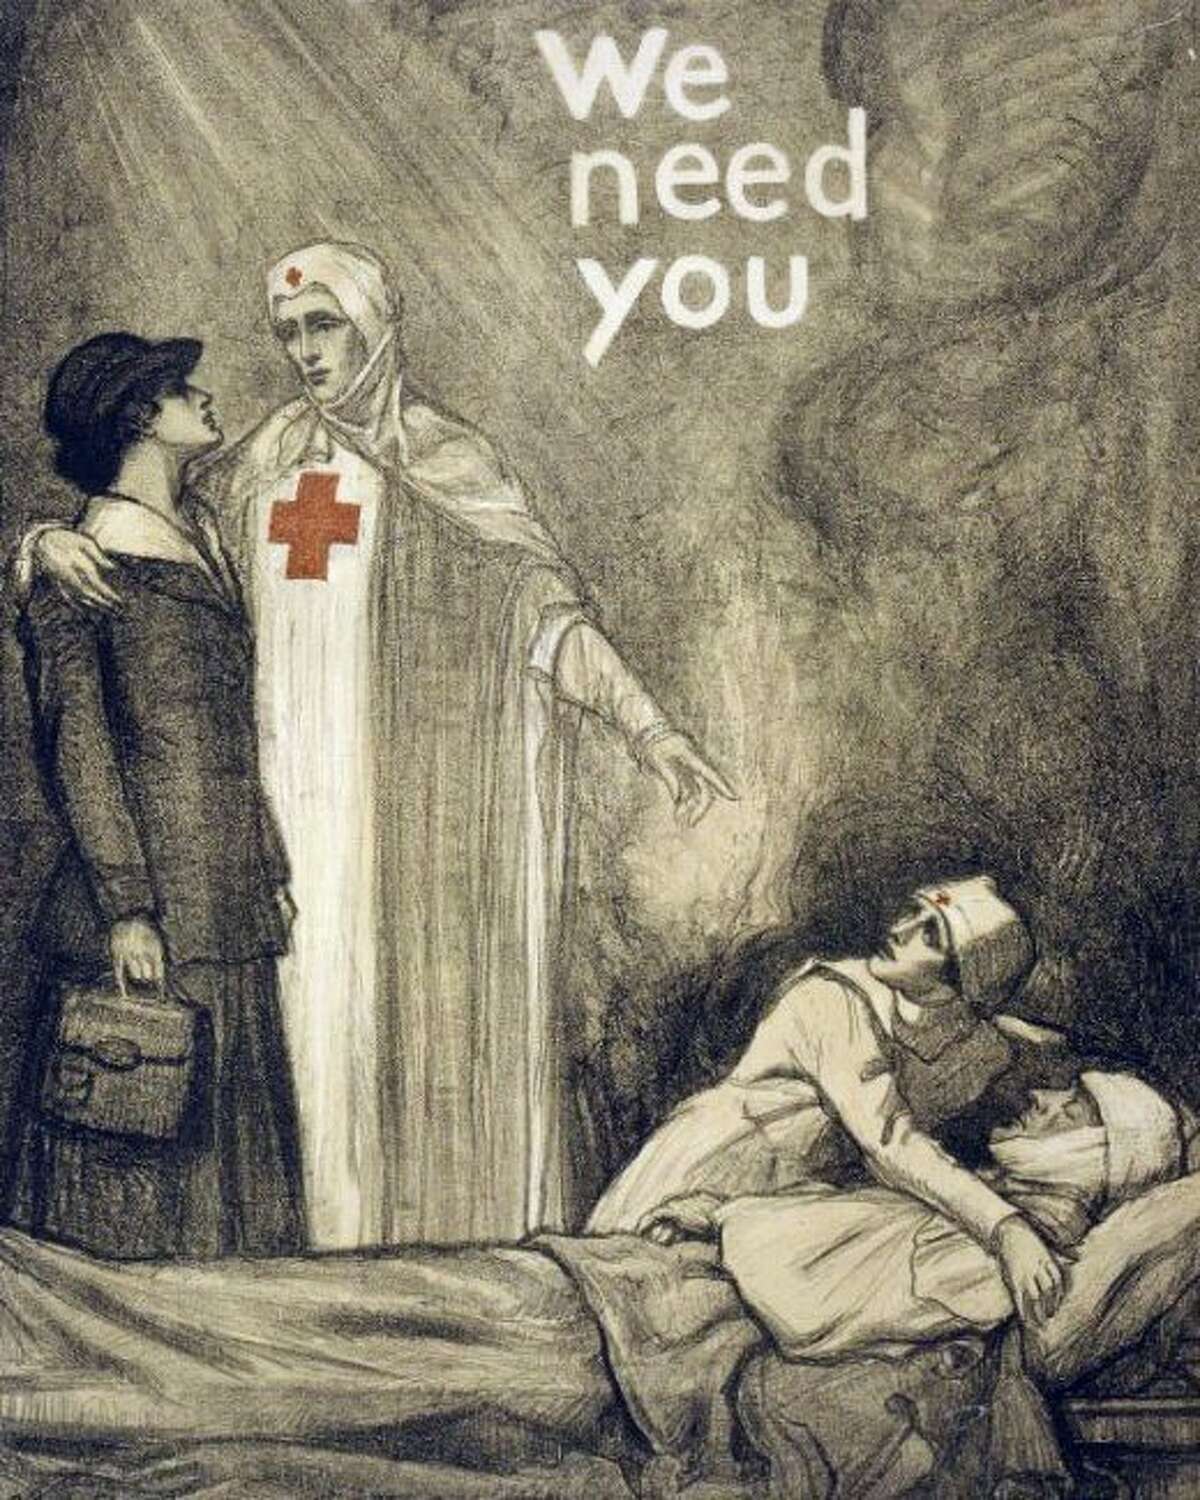 A World War I propaganda poster shows the need for nurses in caring for sick and wounded soldiers. Manistee native, Henrietta Curtis was a nurse in Queen Alexandra's Imperial Nursing Service in Wales beginning in March, 1917.